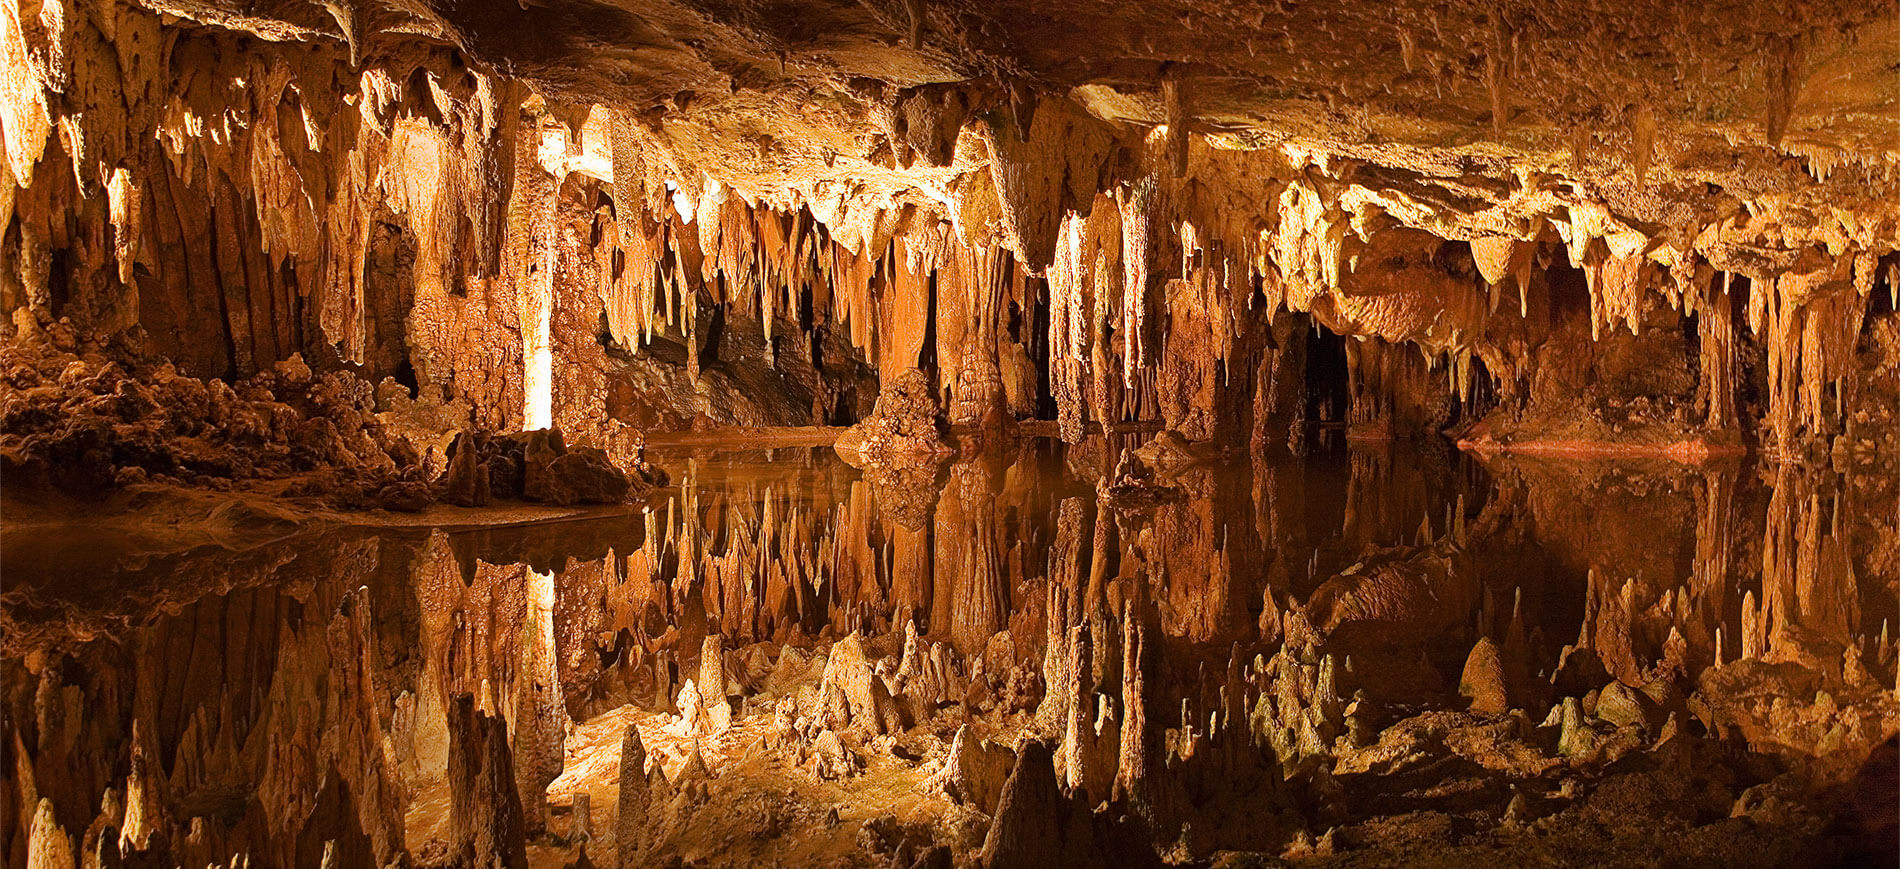 8 Underground Adventures Youll Only Have in the South